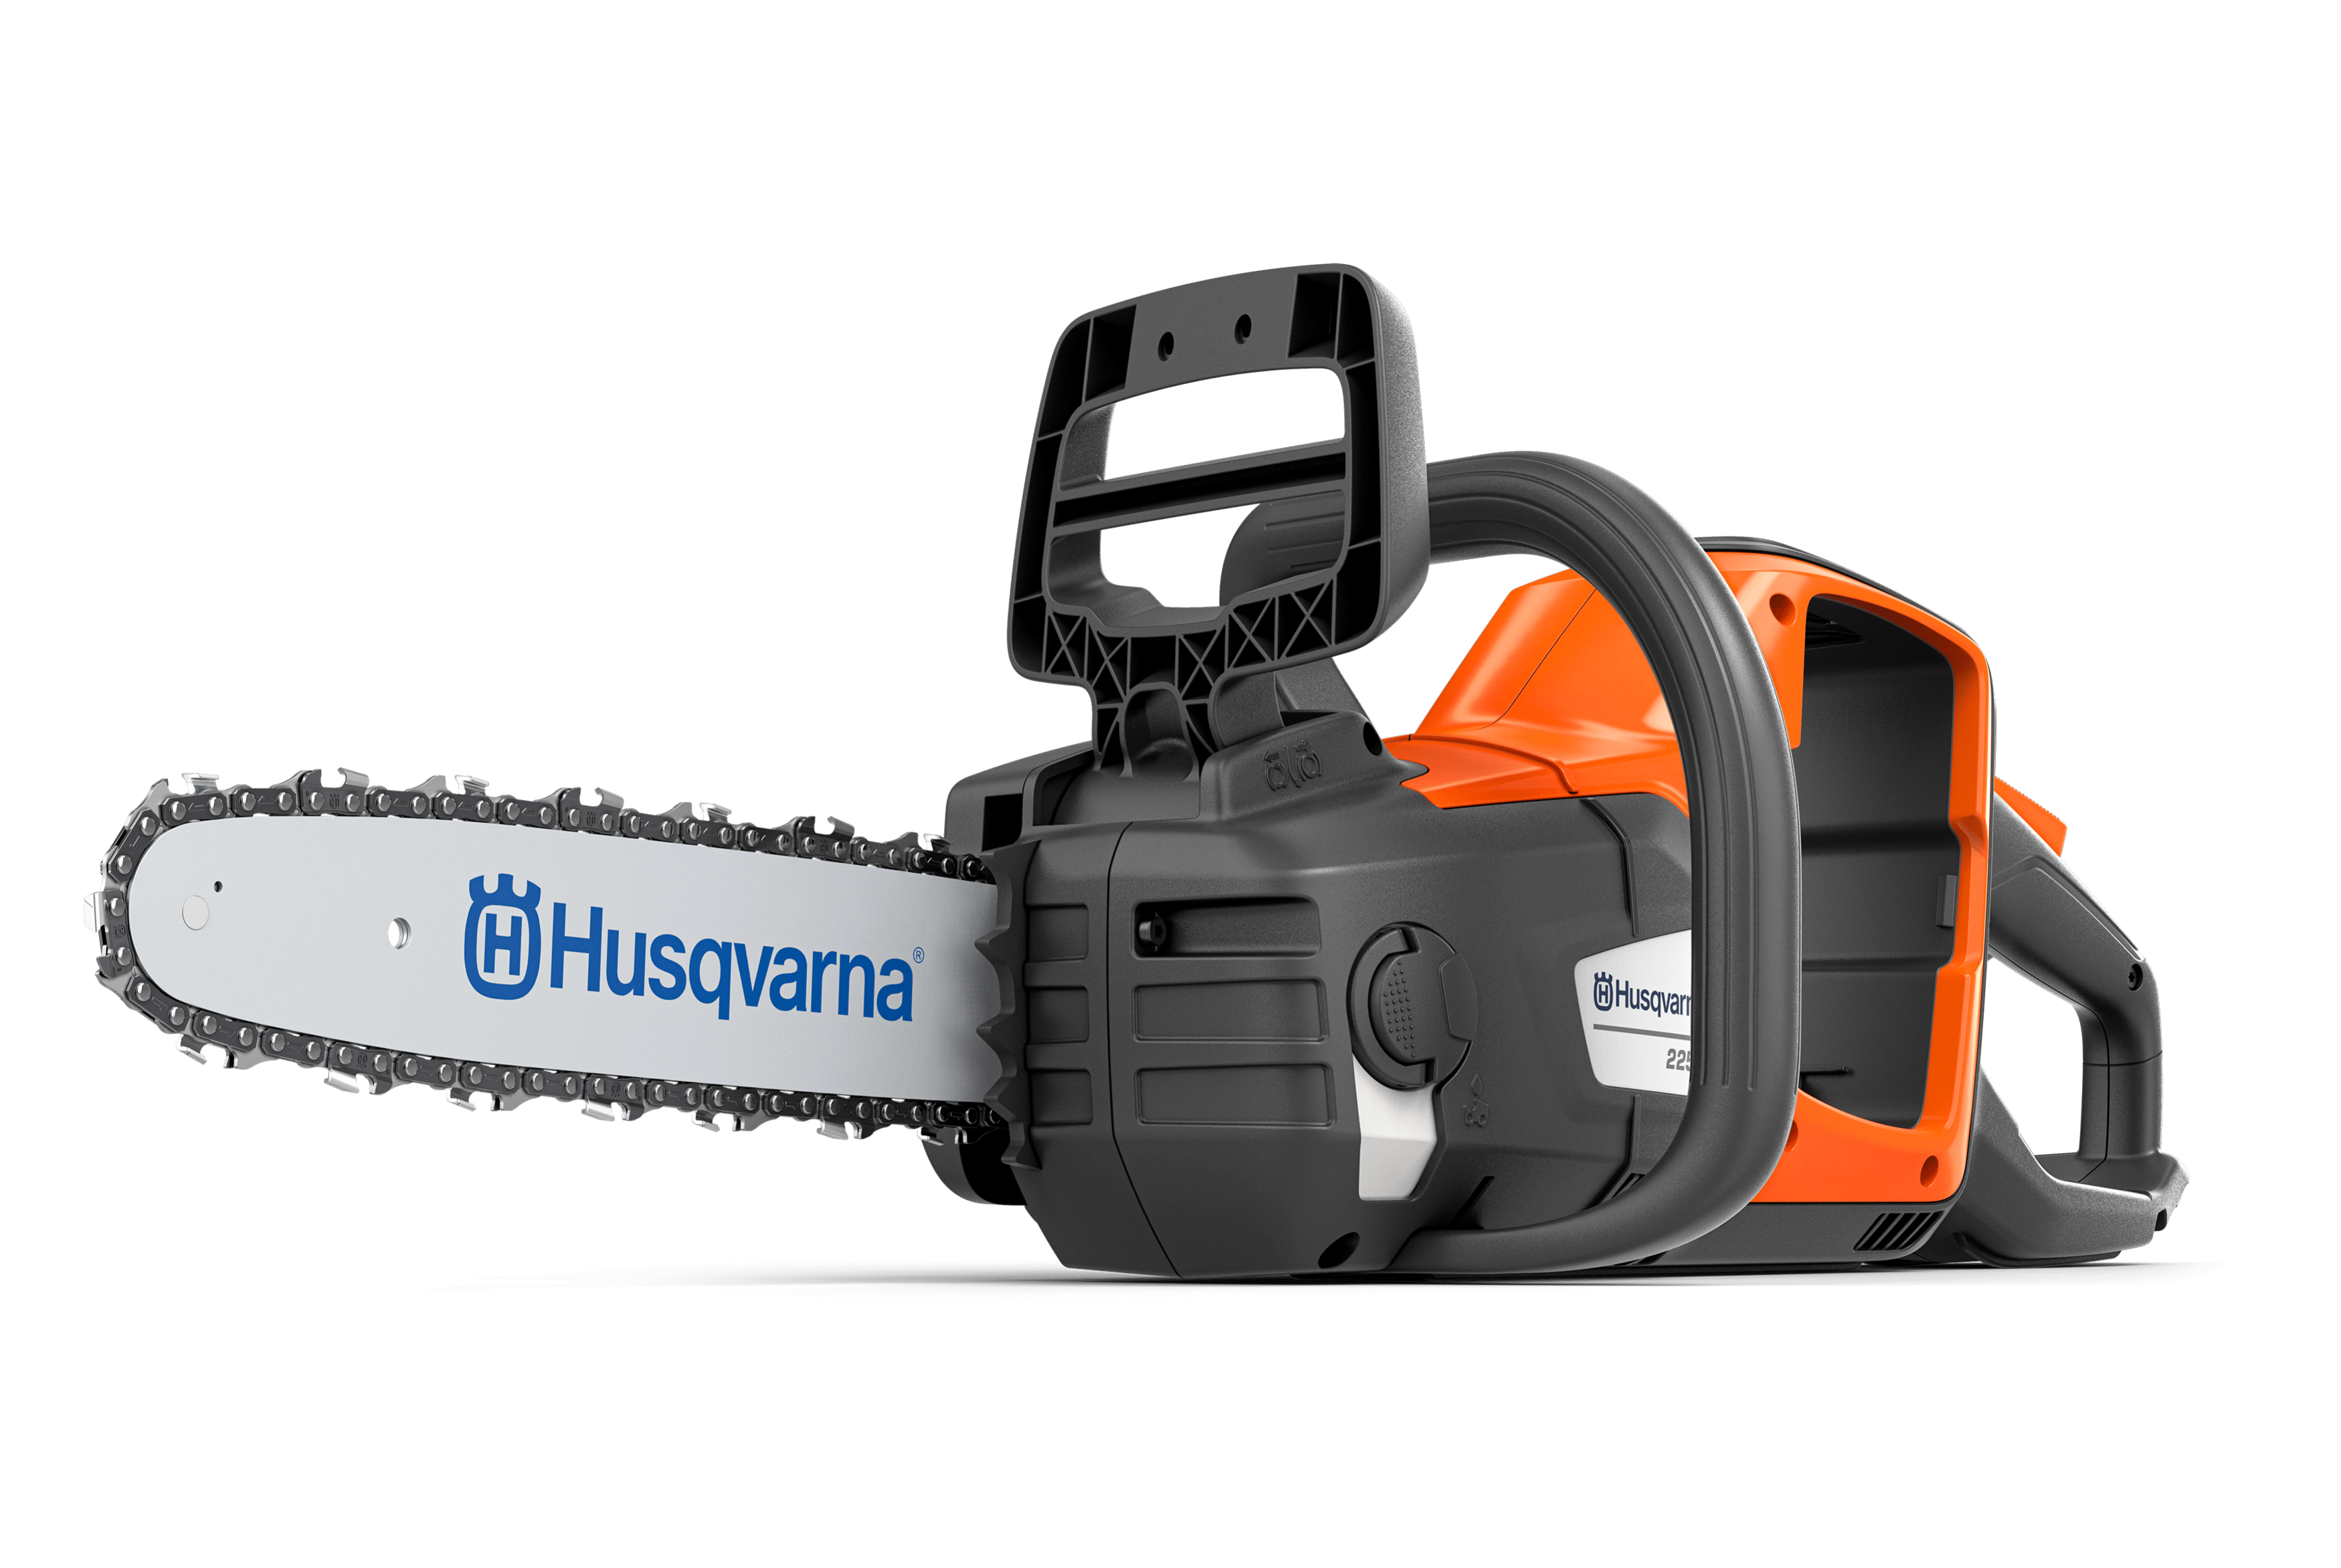 Chainsaw 225i without battery